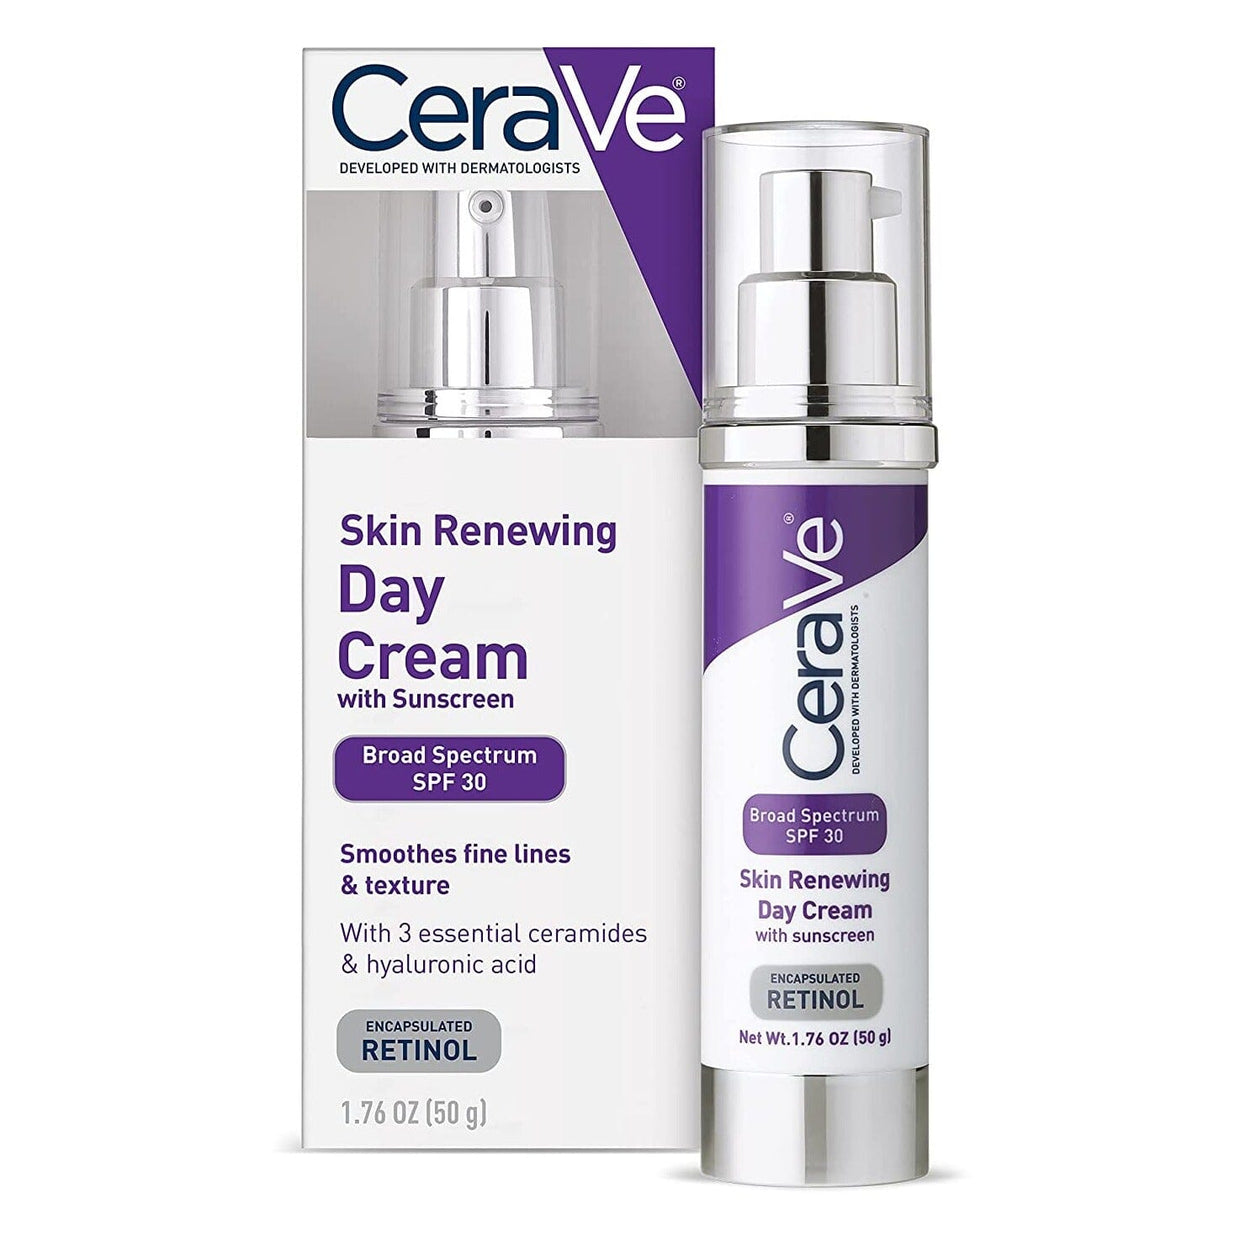 CeraVe Skin Renewing Day Cream SPF 30 Cerave 1.7 oz. Shop at Exclusive Beauty Club